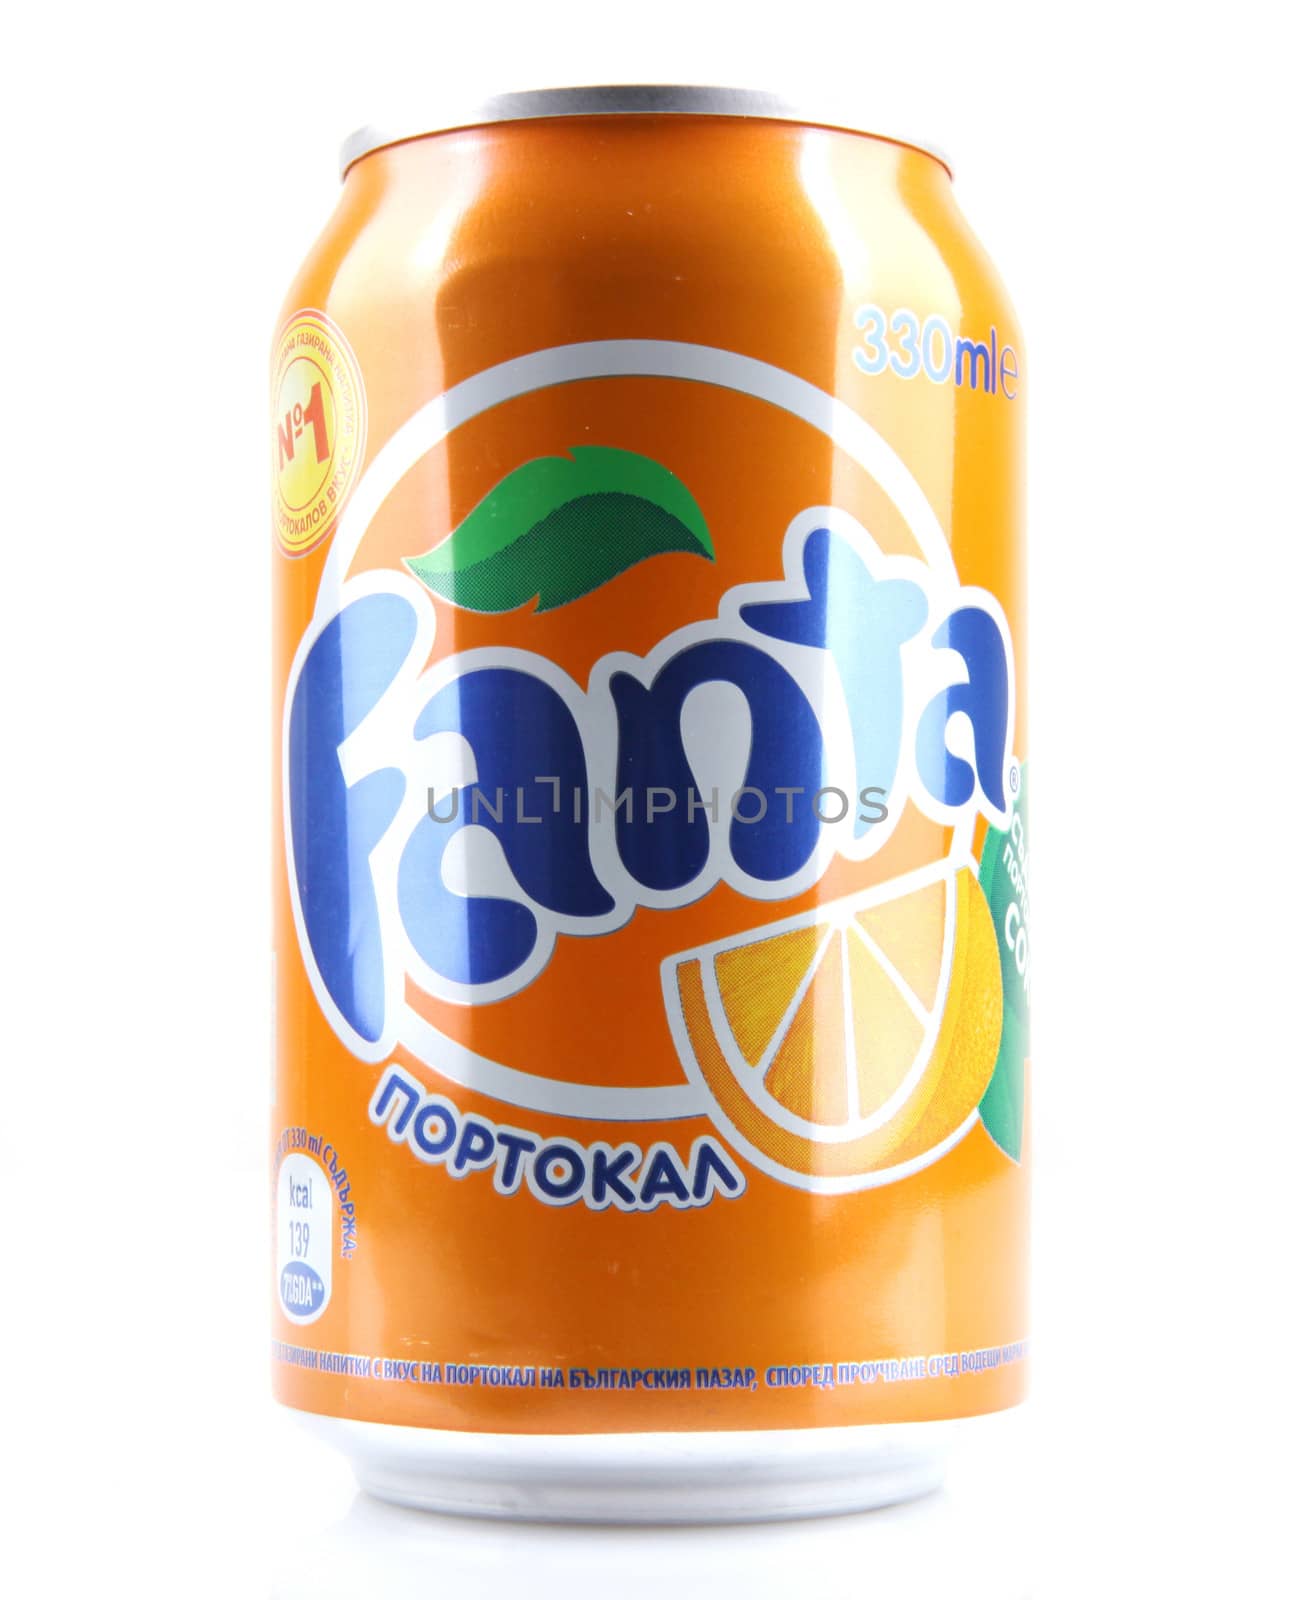 AYTOS, BULGARIA - JANUARY 23, 2014: Fanta bottle can isolated on white background. Fanta is a carbonated soft drink sold in stores, restaurants, and vending machines throughout the world.